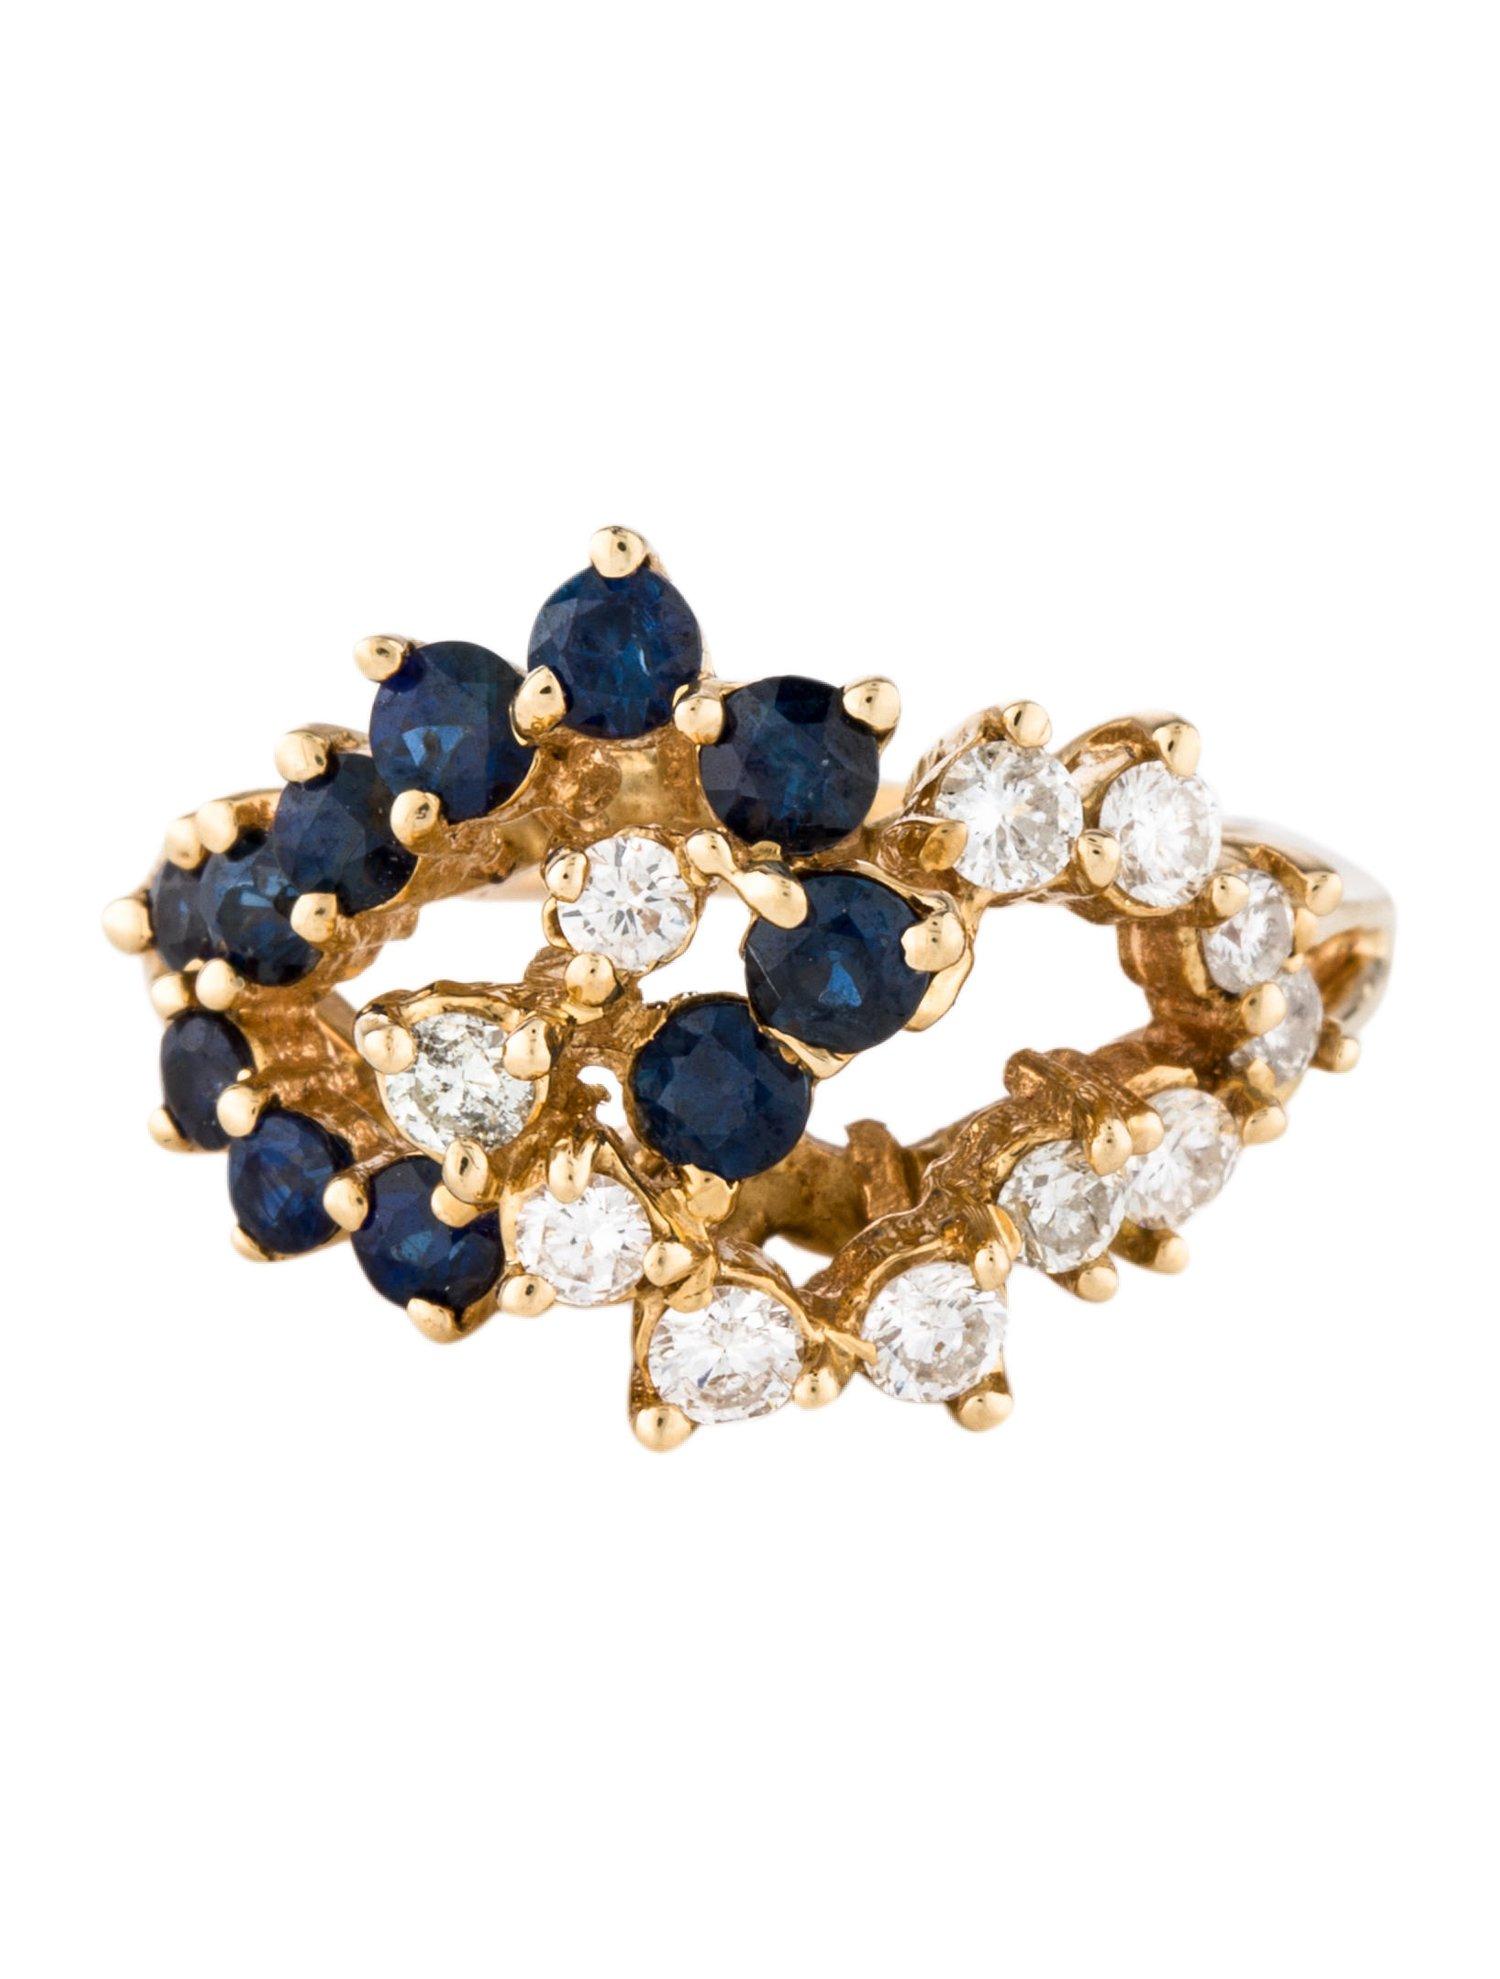 Round Cut Sapphire Diamond Cluster Cocktail Ring Yellow Gold Vintage Estate Jewelry